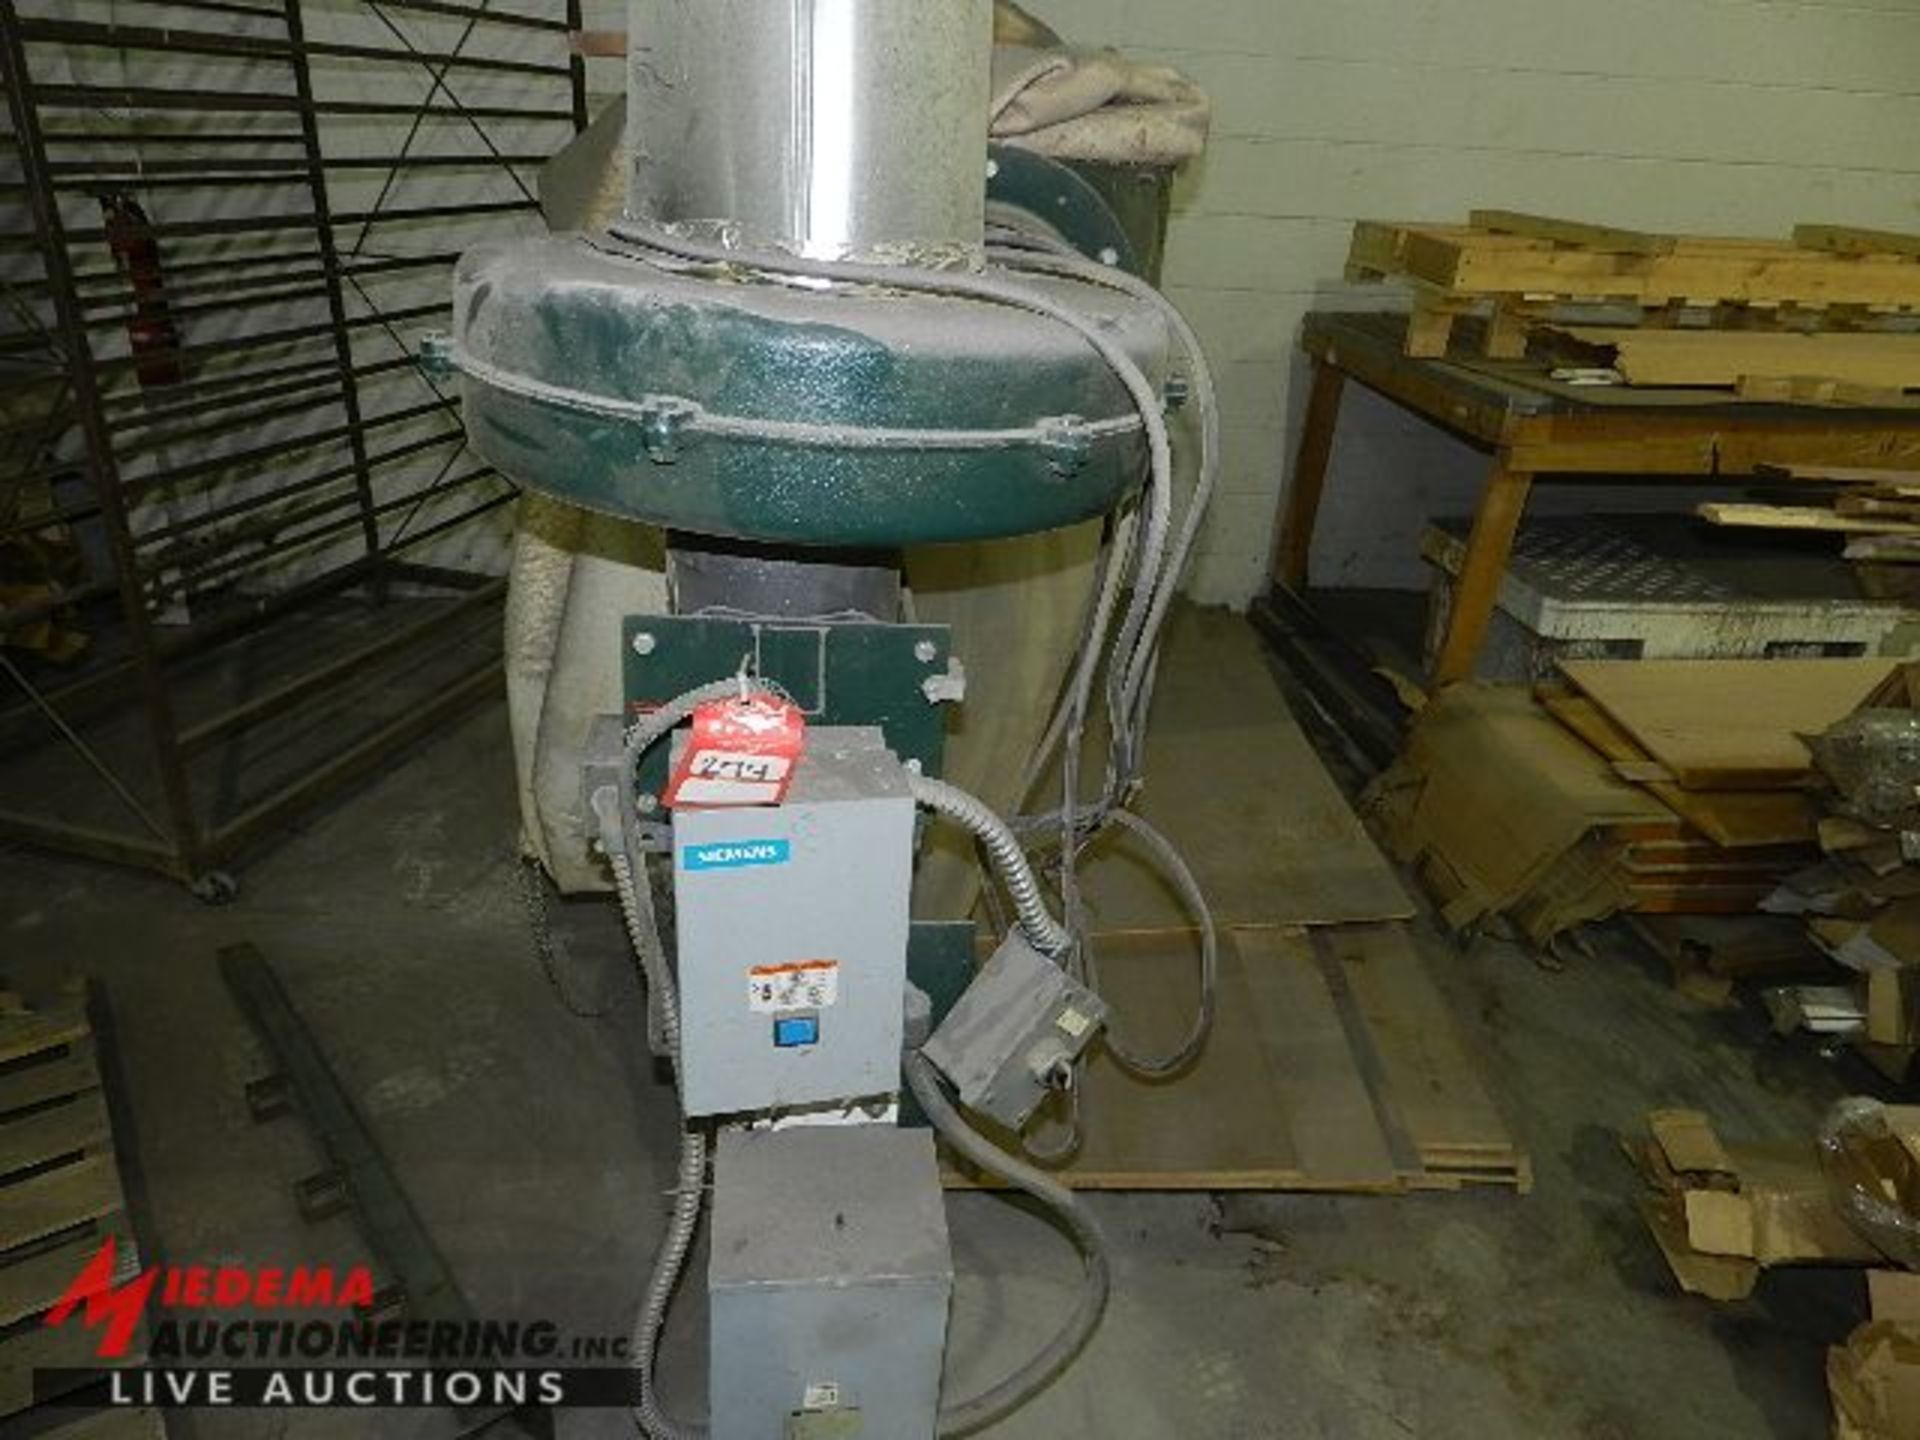 GRIZZLY 3 BAG DUST COLLECTOR WITH VALDOR 7 1/2 HP 23460 VOLT 3 PHASE ELECTRIC MOTOR - Image 3 of 3